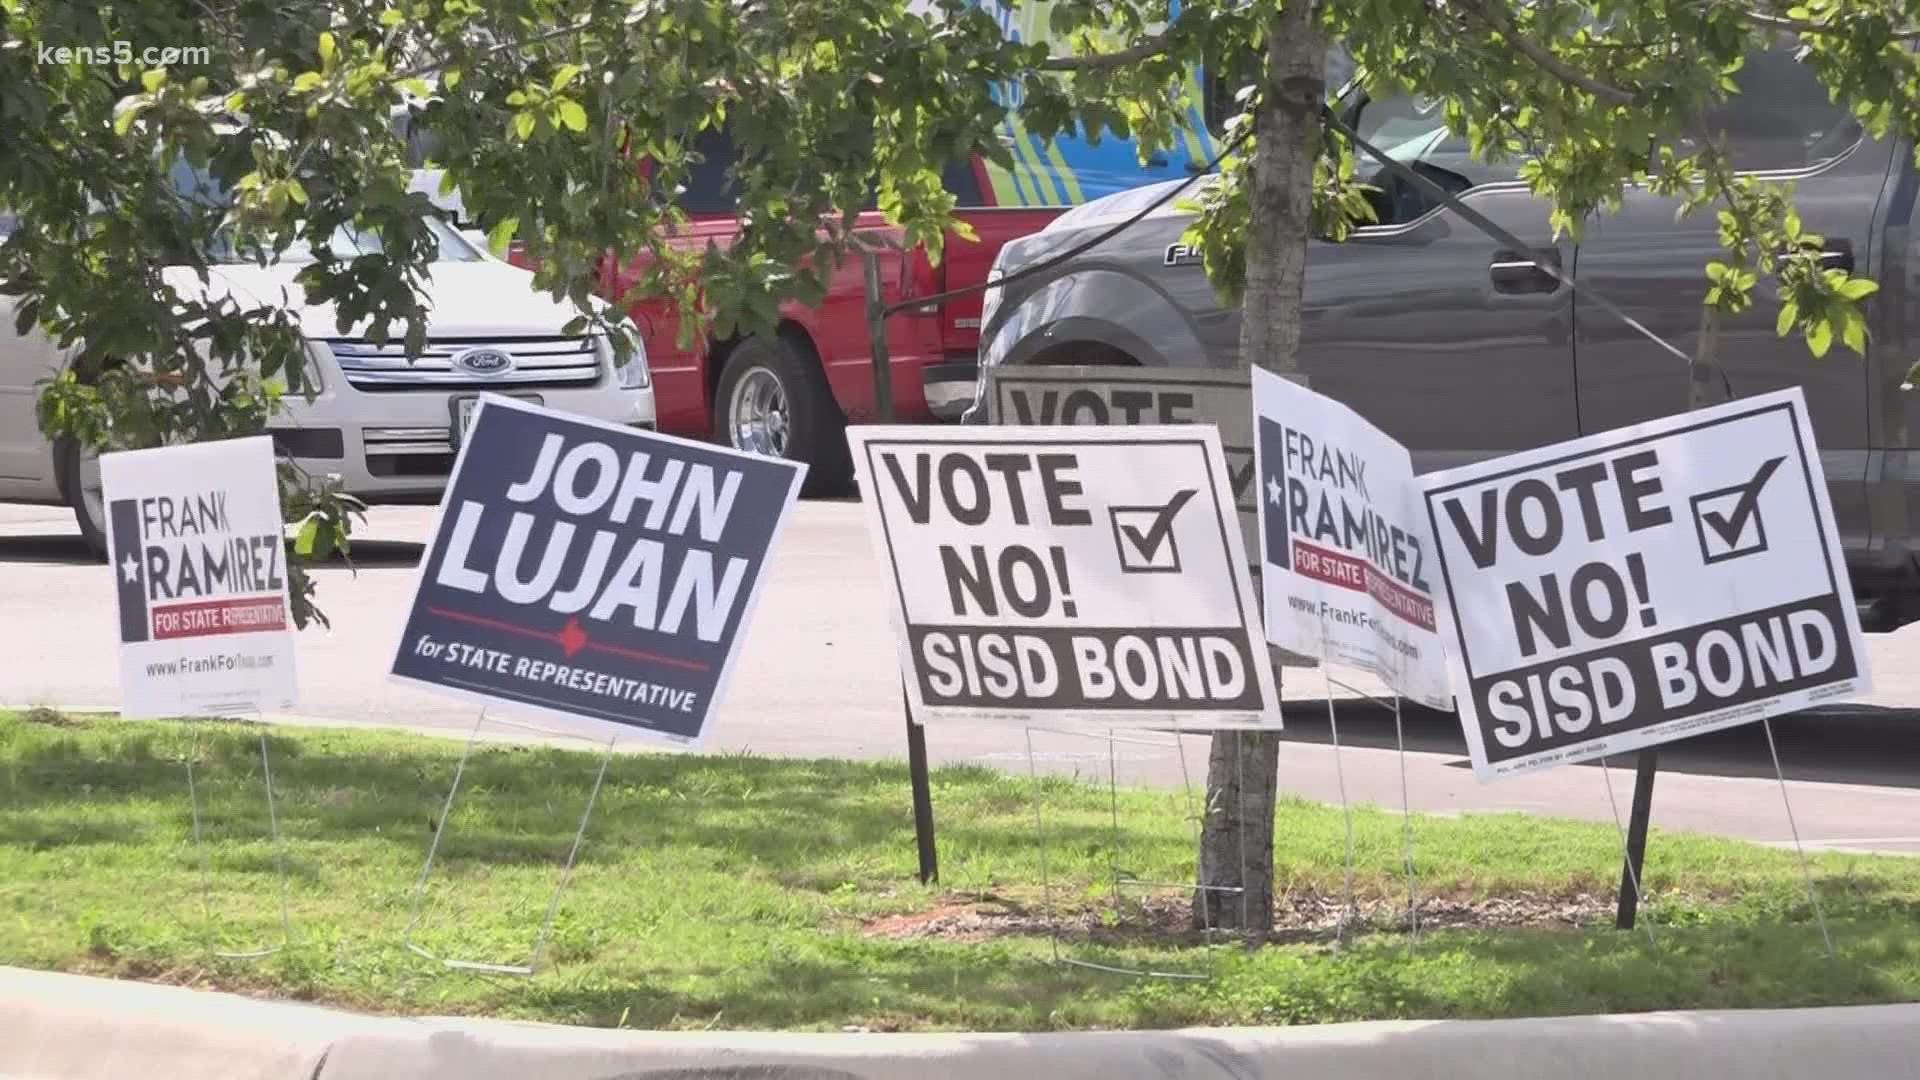 A University of Texas at San Antonio political science professor explains the trends and behaviors he believes contributed to Tuesday's election results.